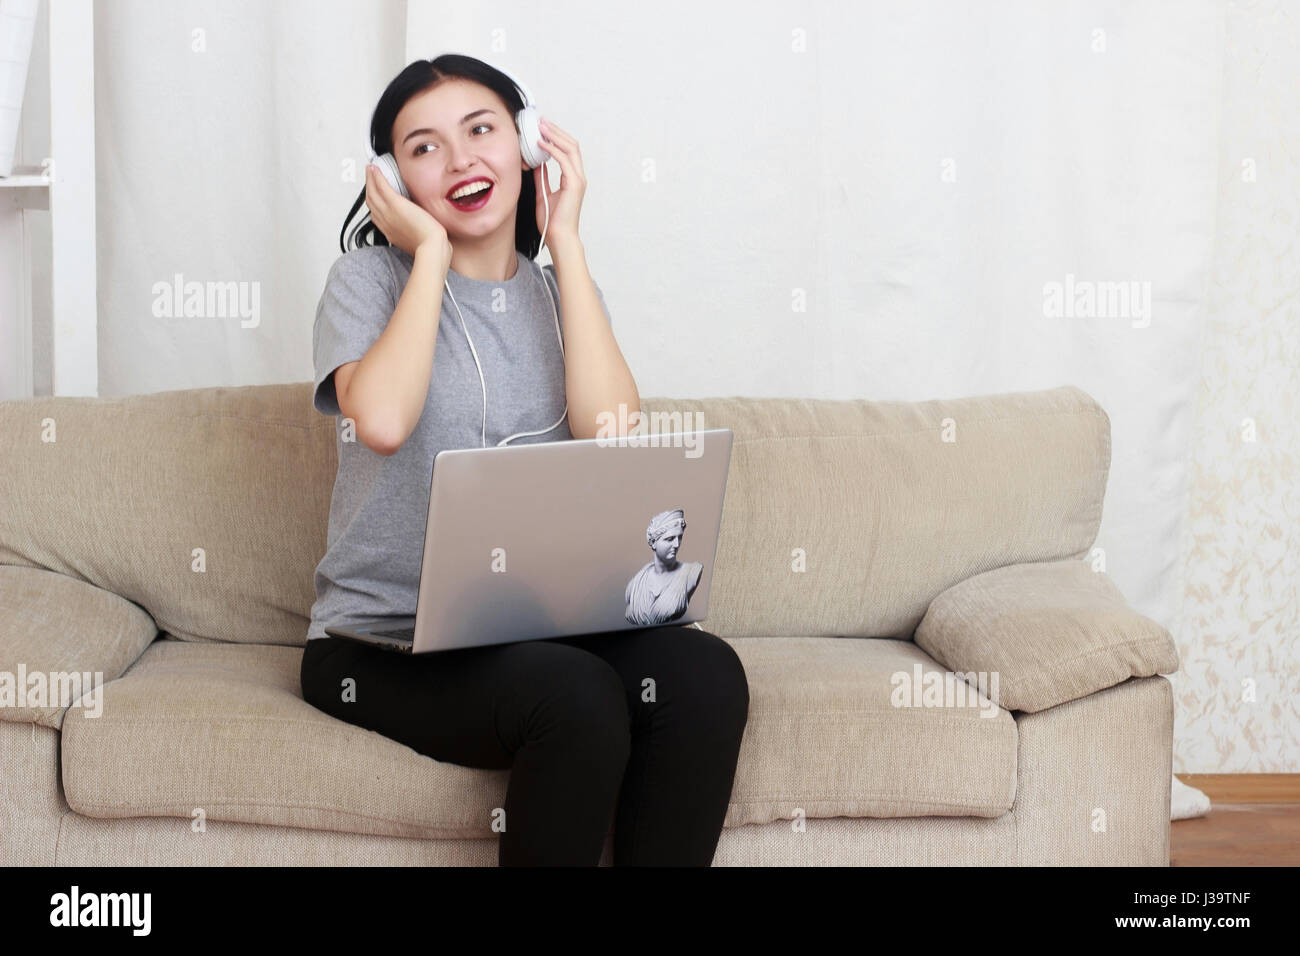 woman using laptop computer and headphones, sitting on living room Stock Photo